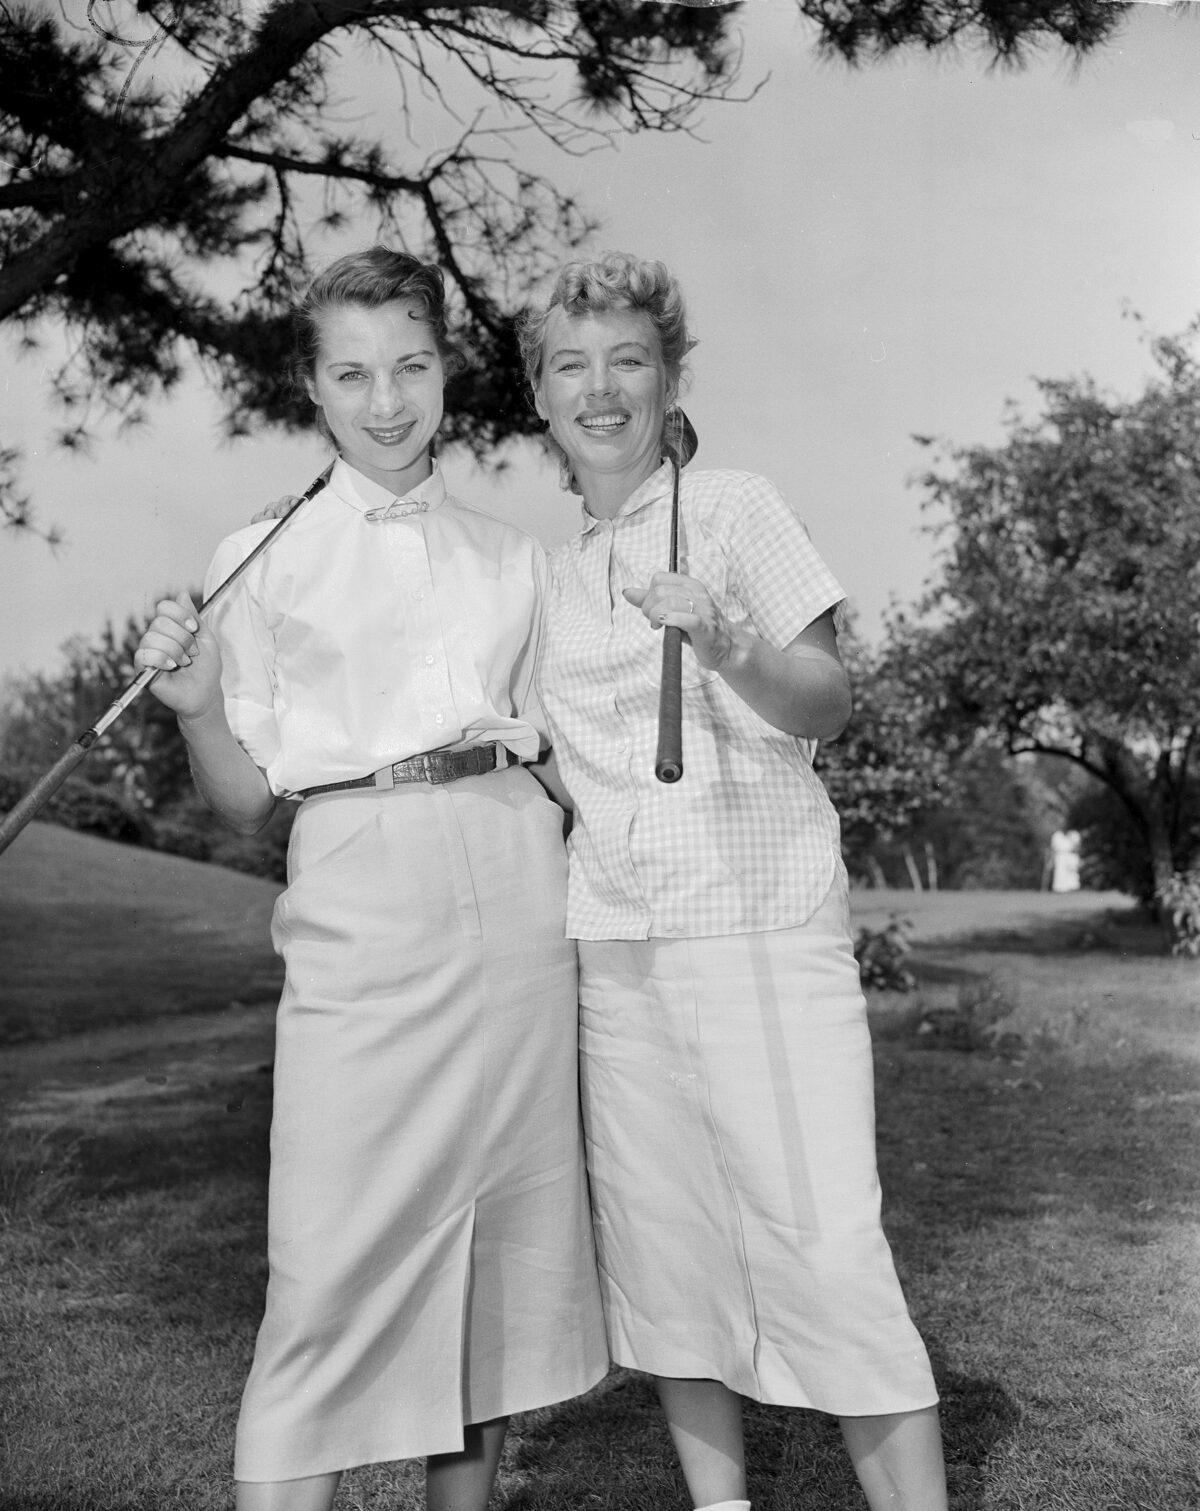 Marlene Bauer (L) and Alice Bauer pose before their first round of play in the Women's National Open golf championship at Peabody, Mass., on July 1, 1954. (AP Photo)